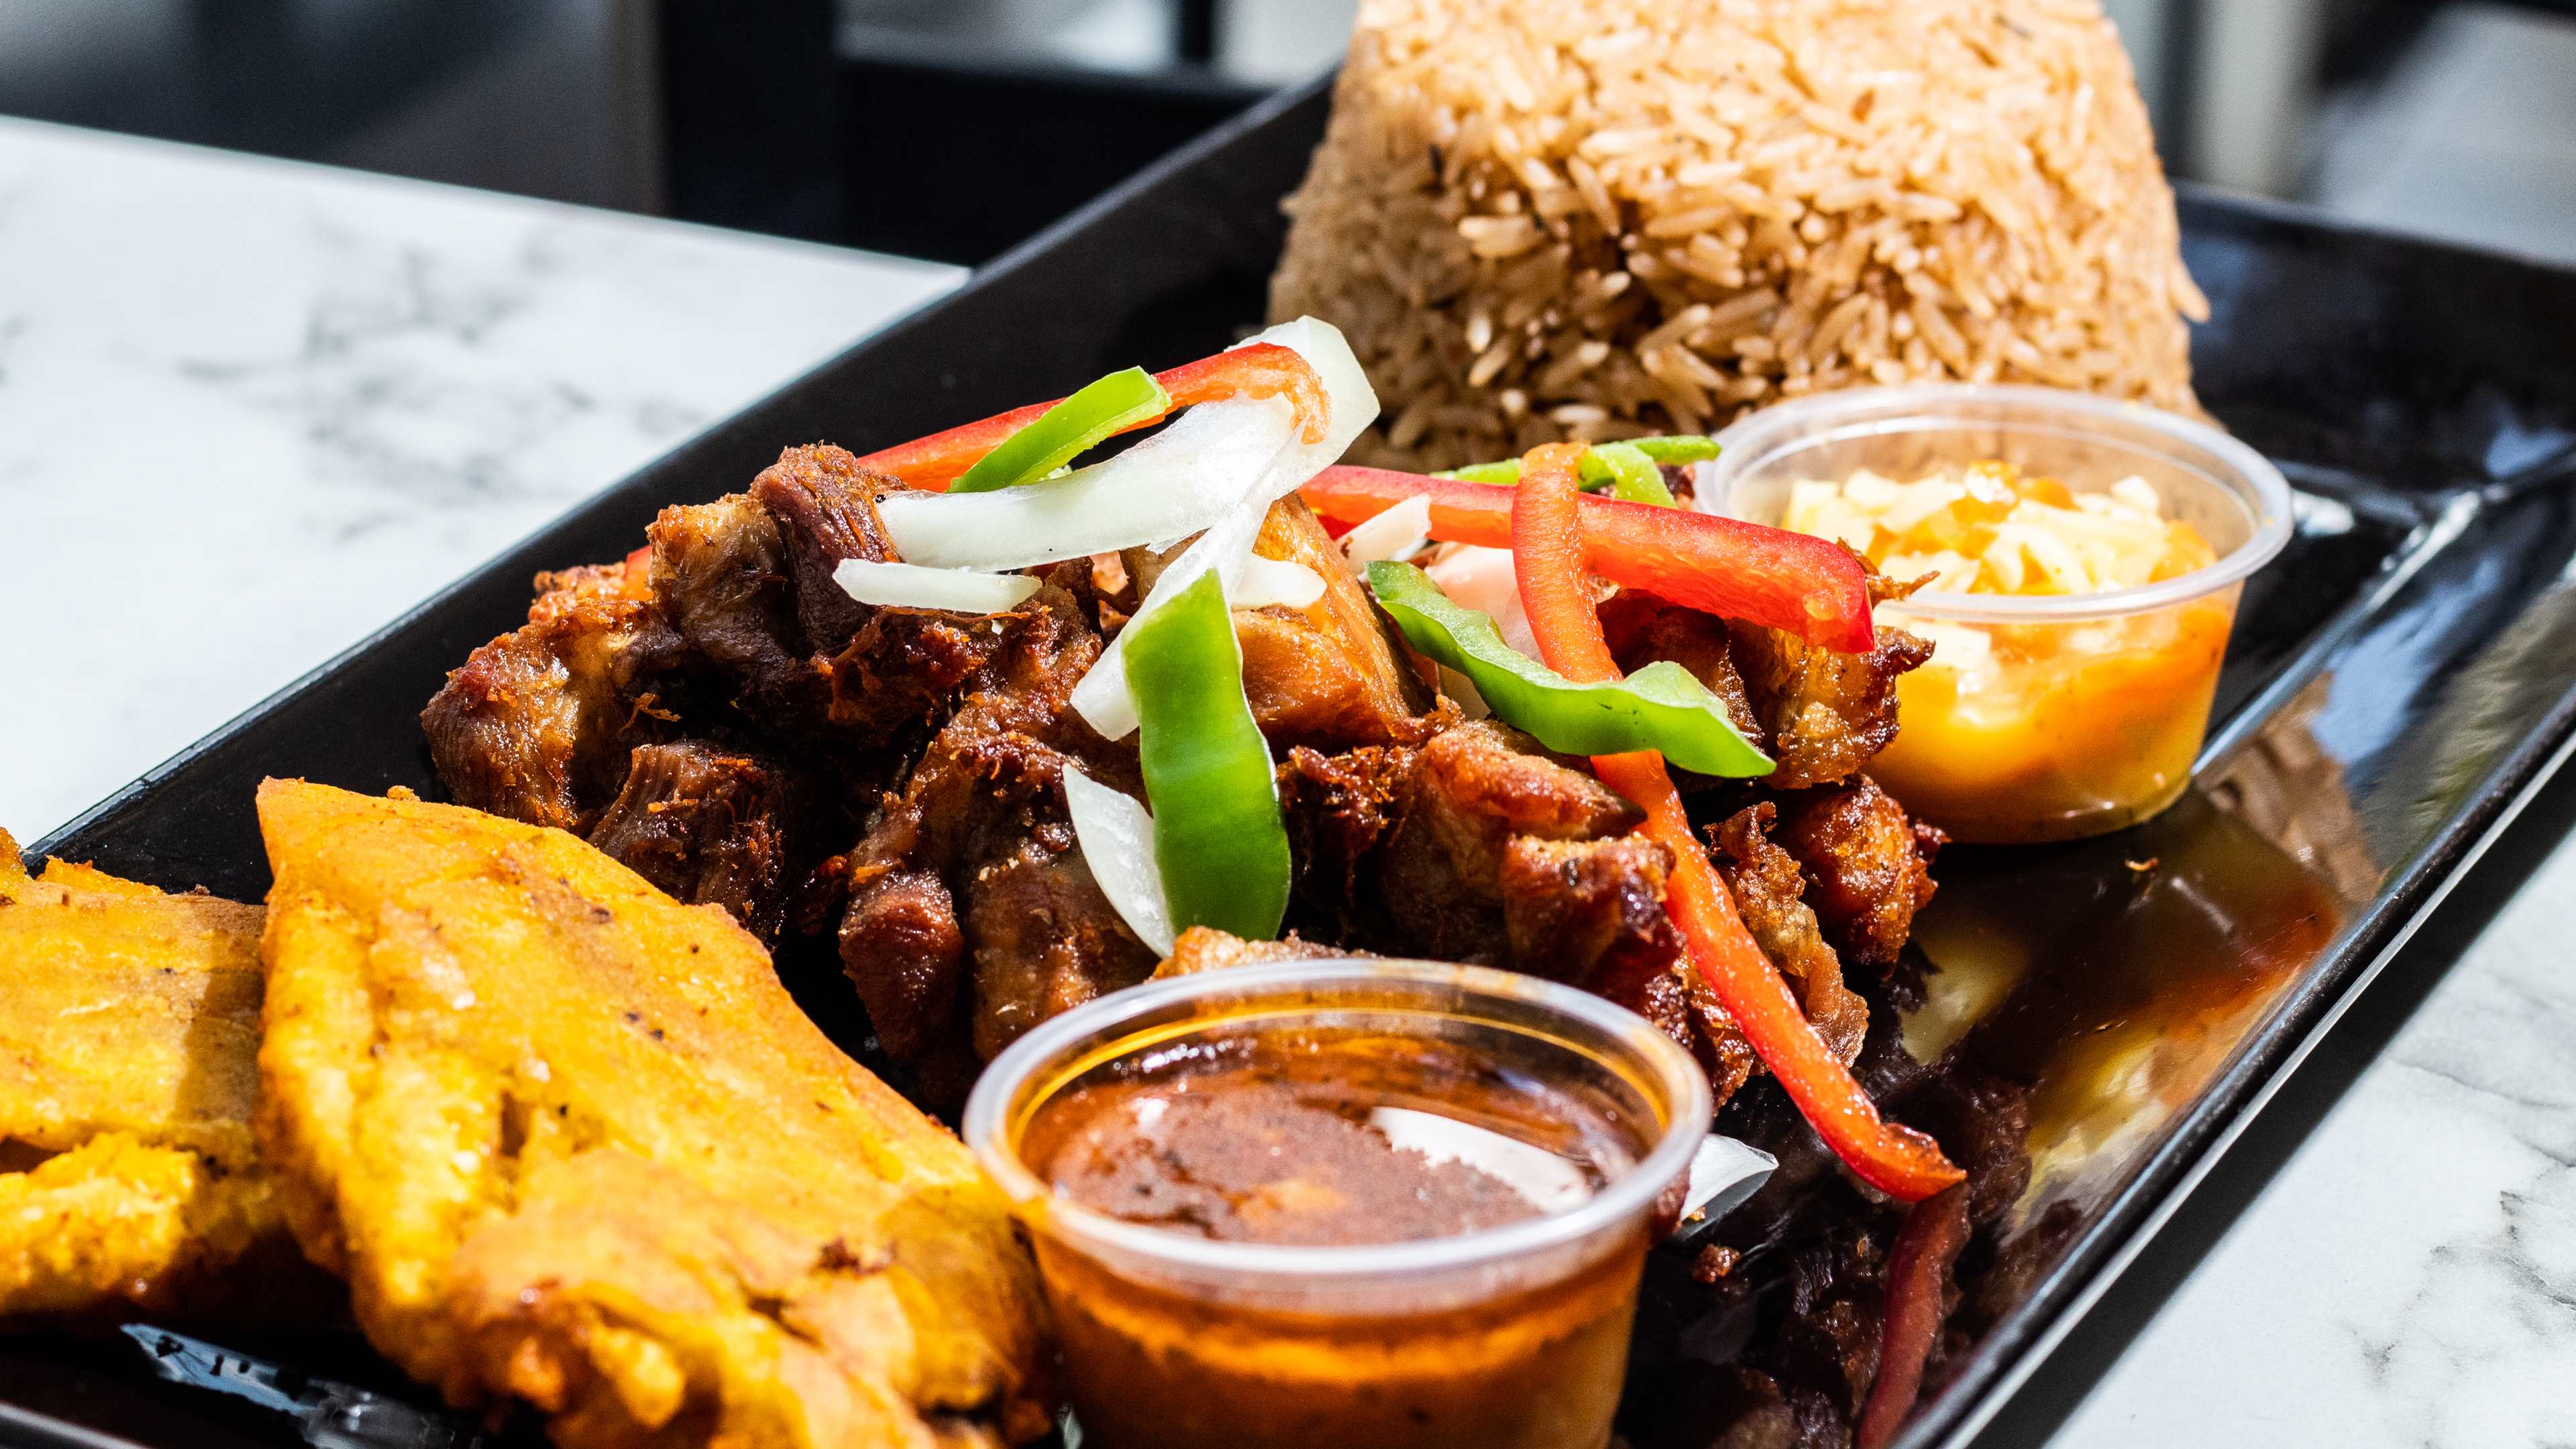 Griot and a pile of rice on a rectangular black plate.